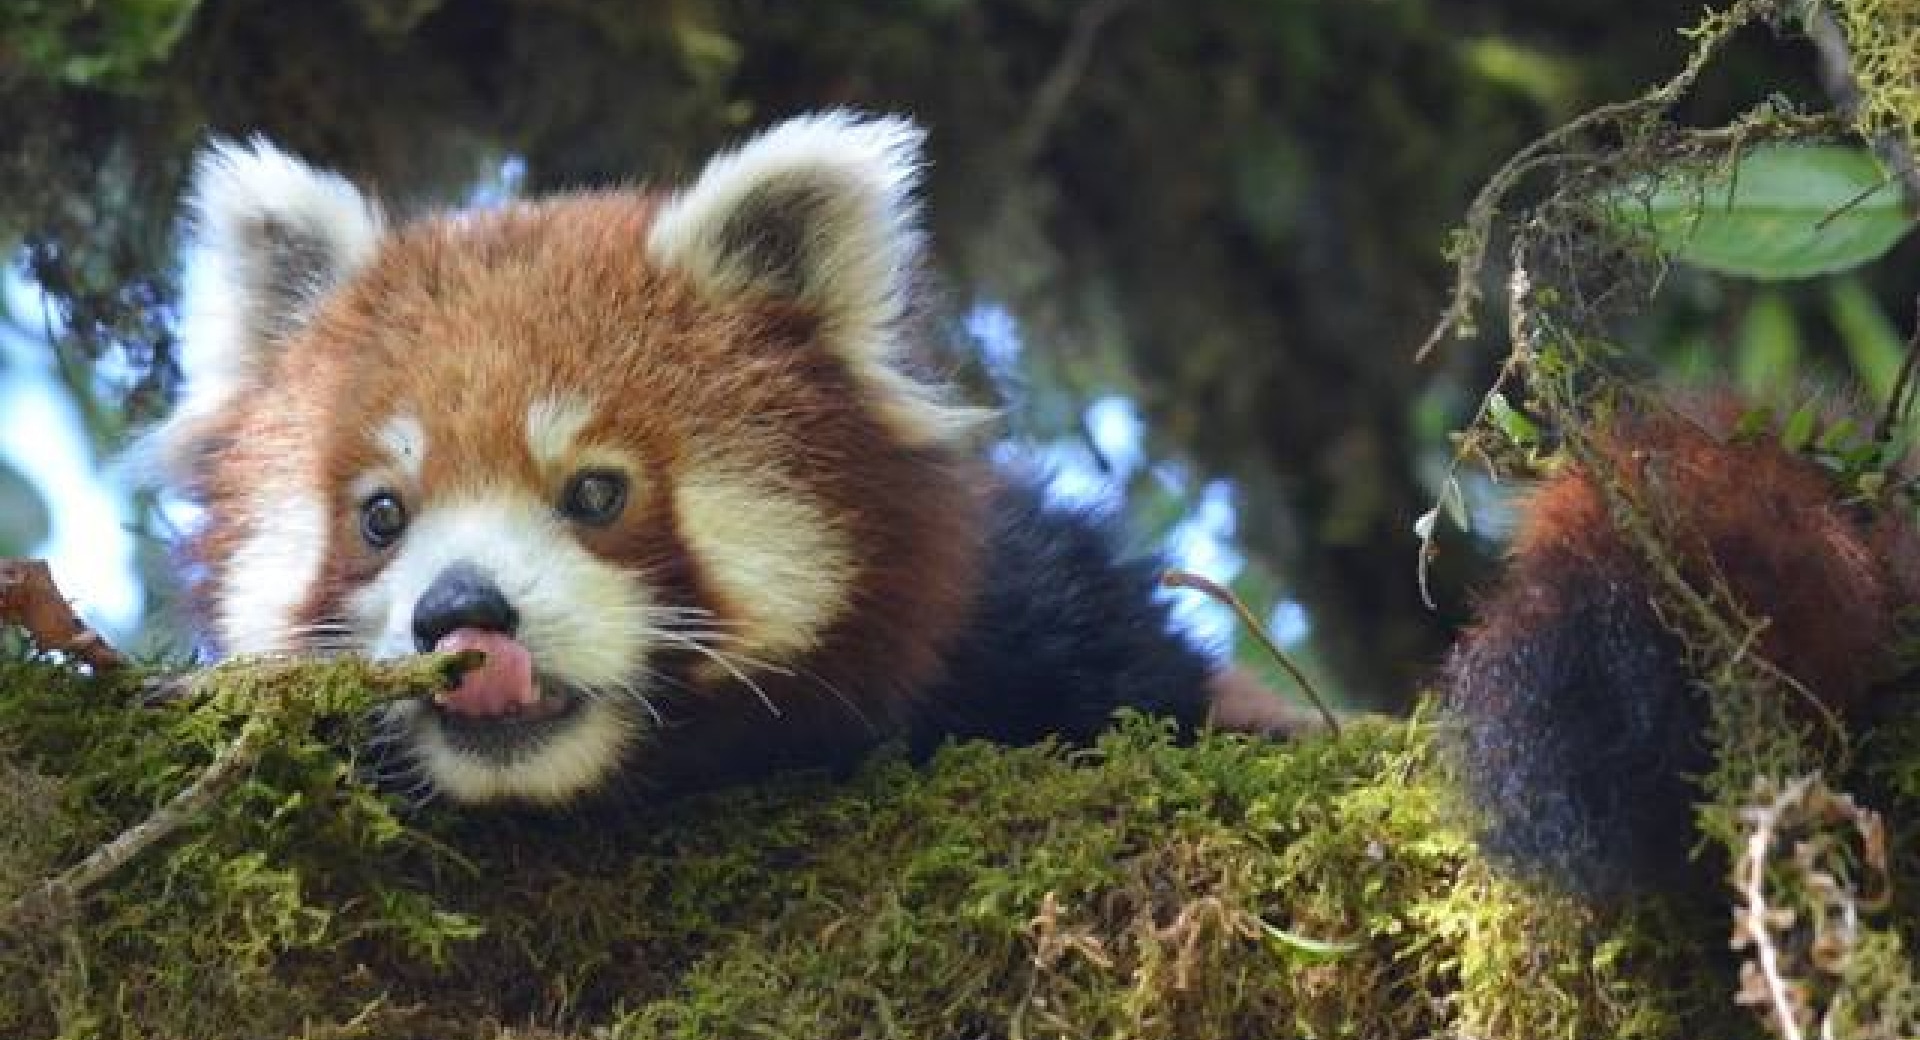 A red panda found in a forest in Nepal.